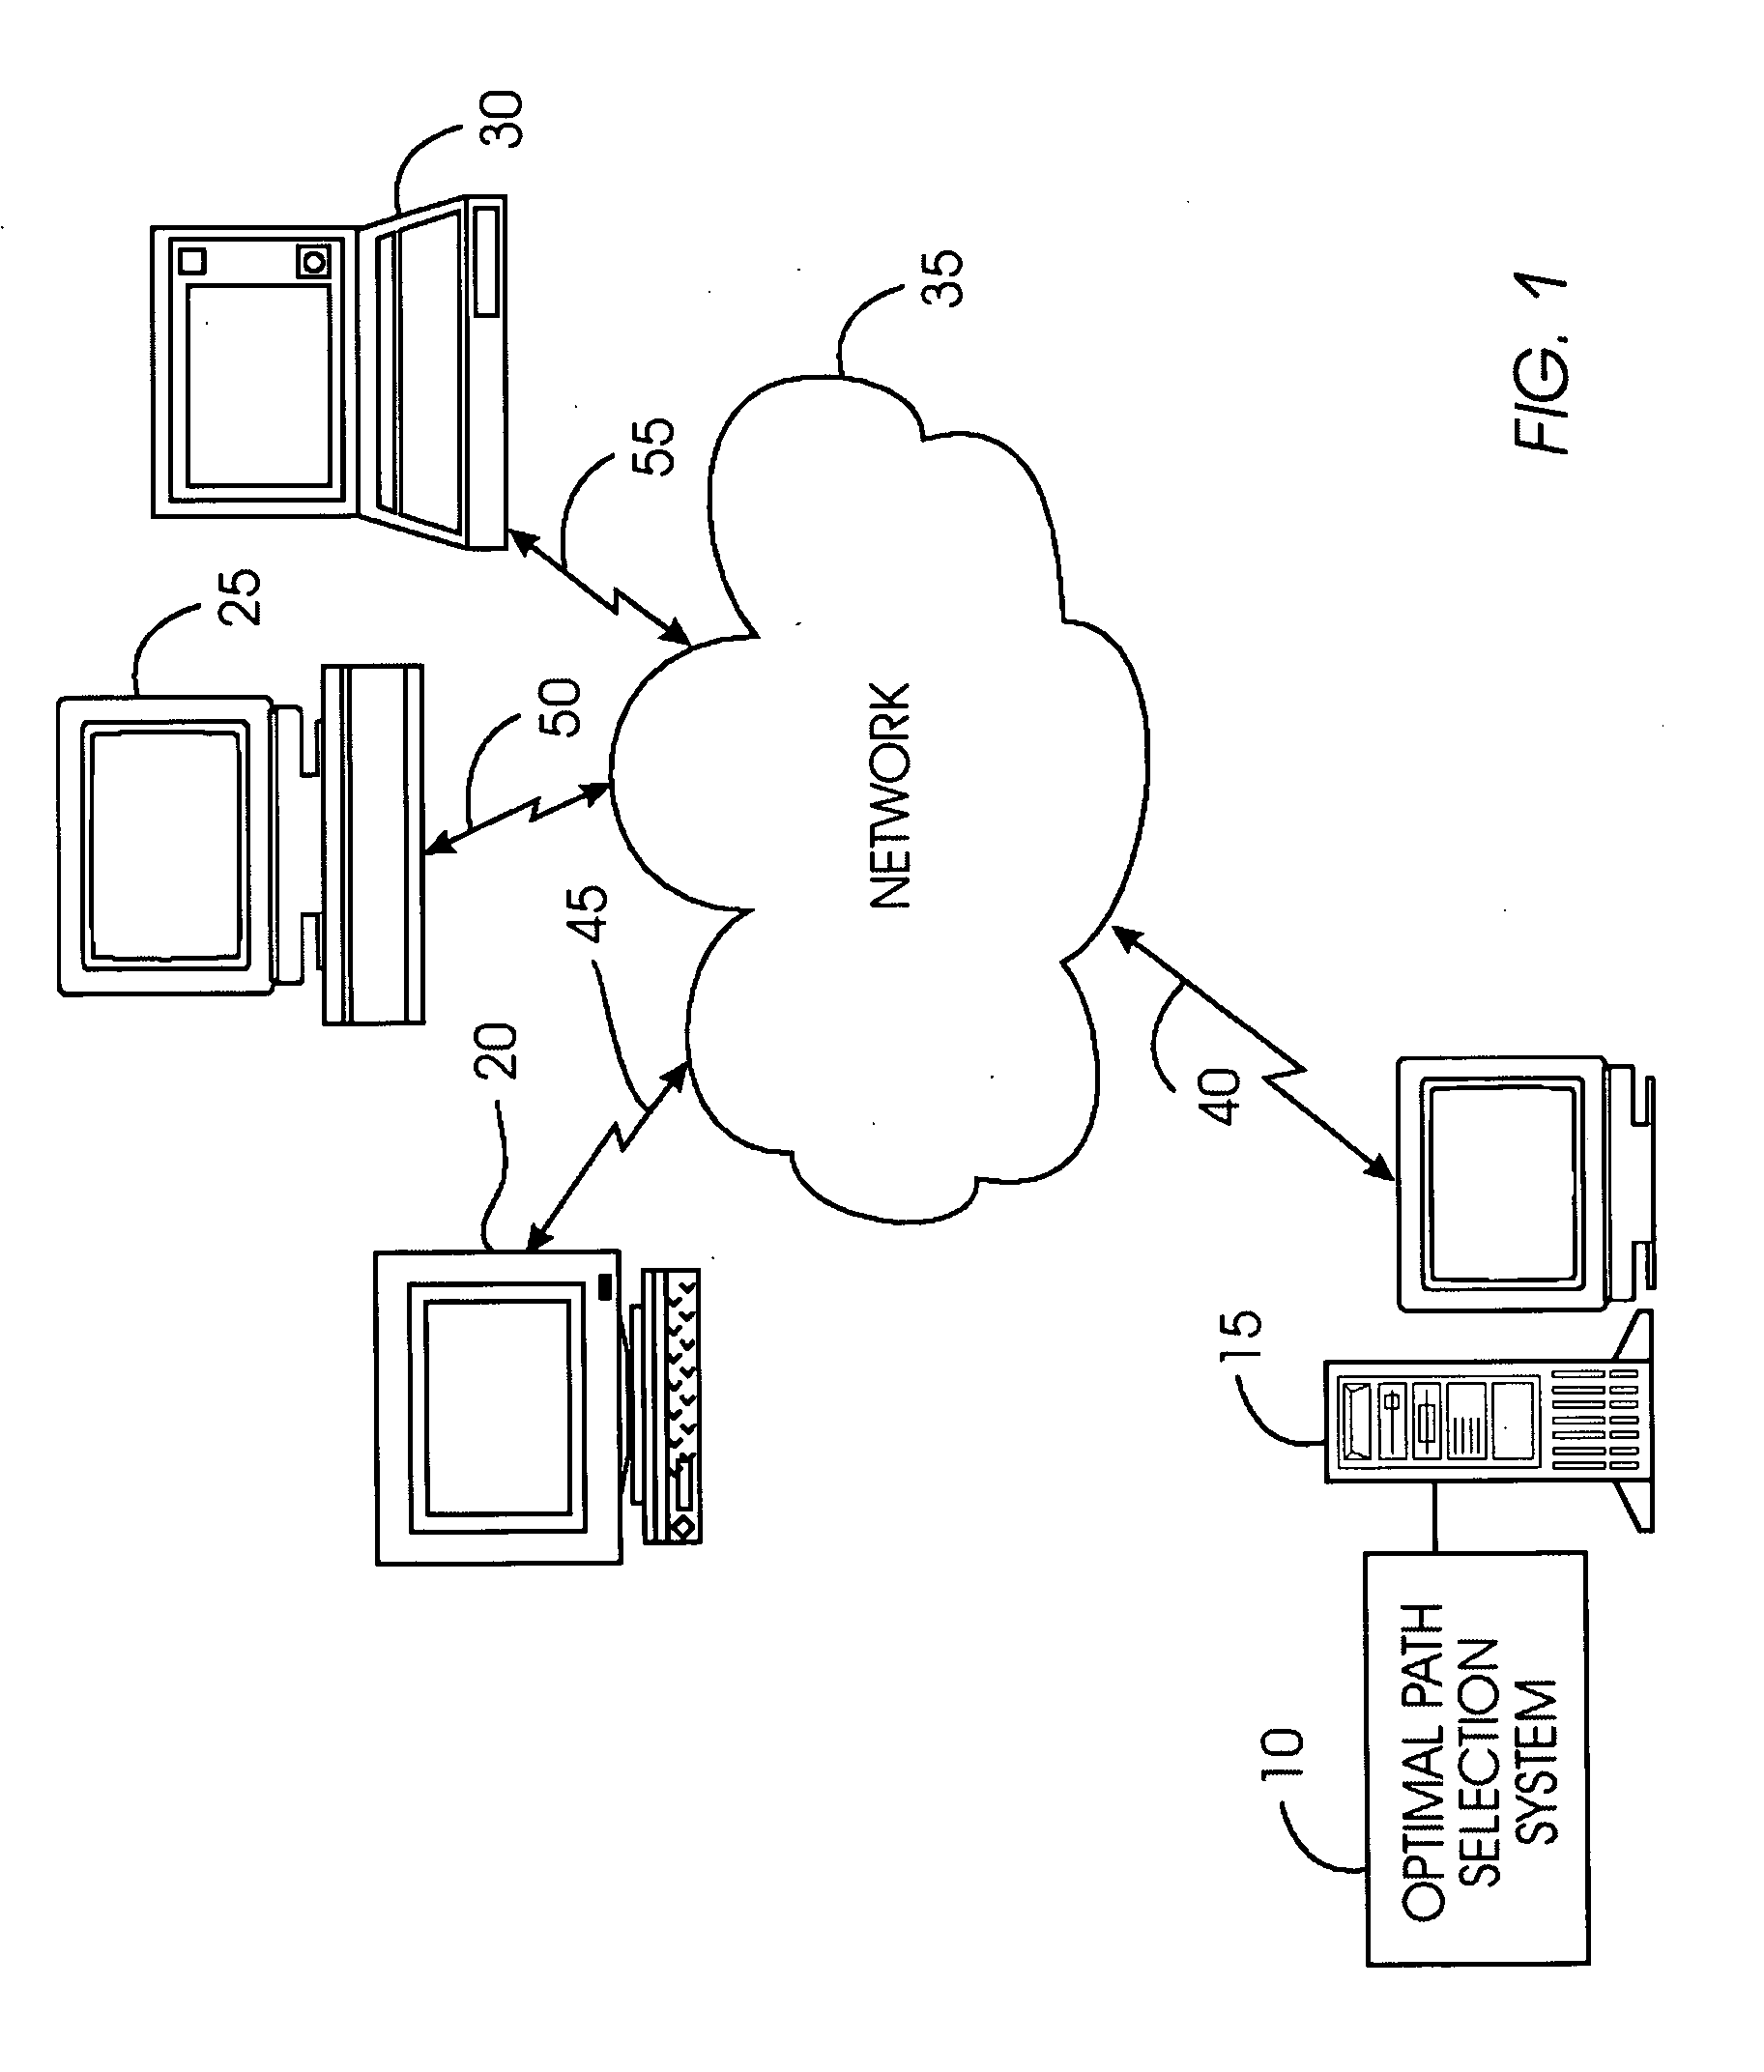 System, method, and service for finding an optimal collection of paths among a plurality of paths between two nodes in a complex network